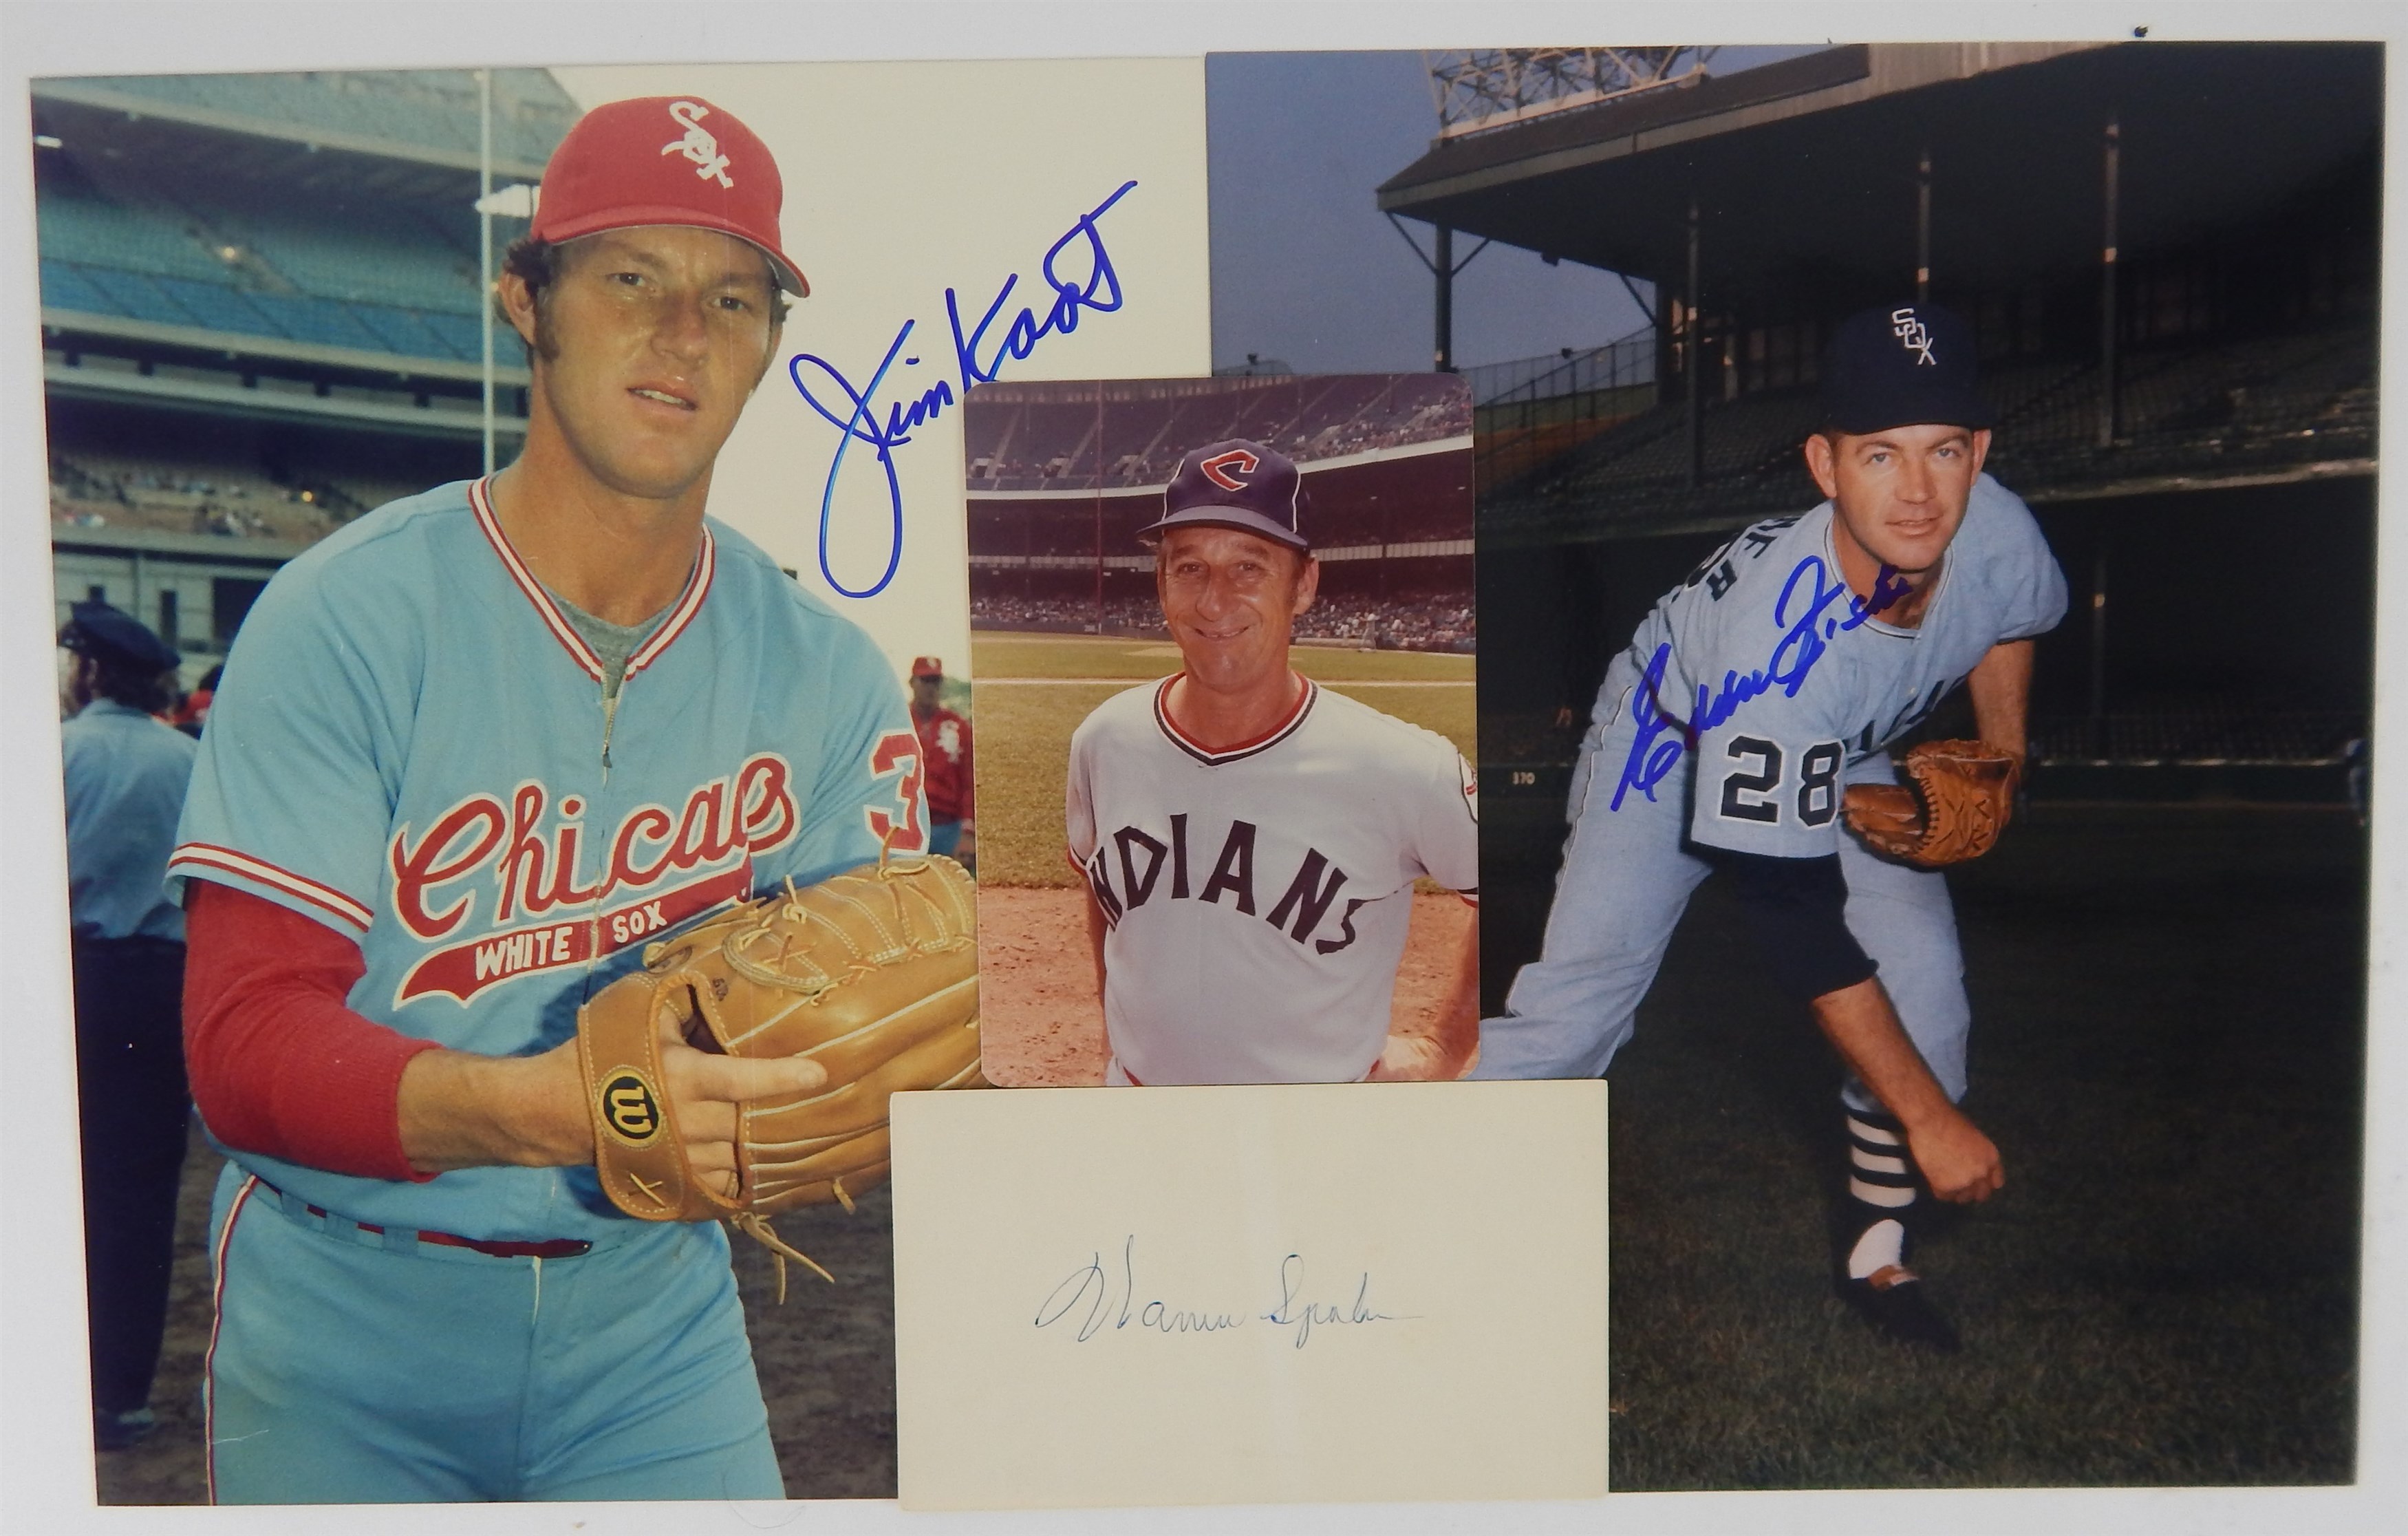 Baseball Autographs - White Sox/Twins Autographs, Letters, Photos and Cards (80+)